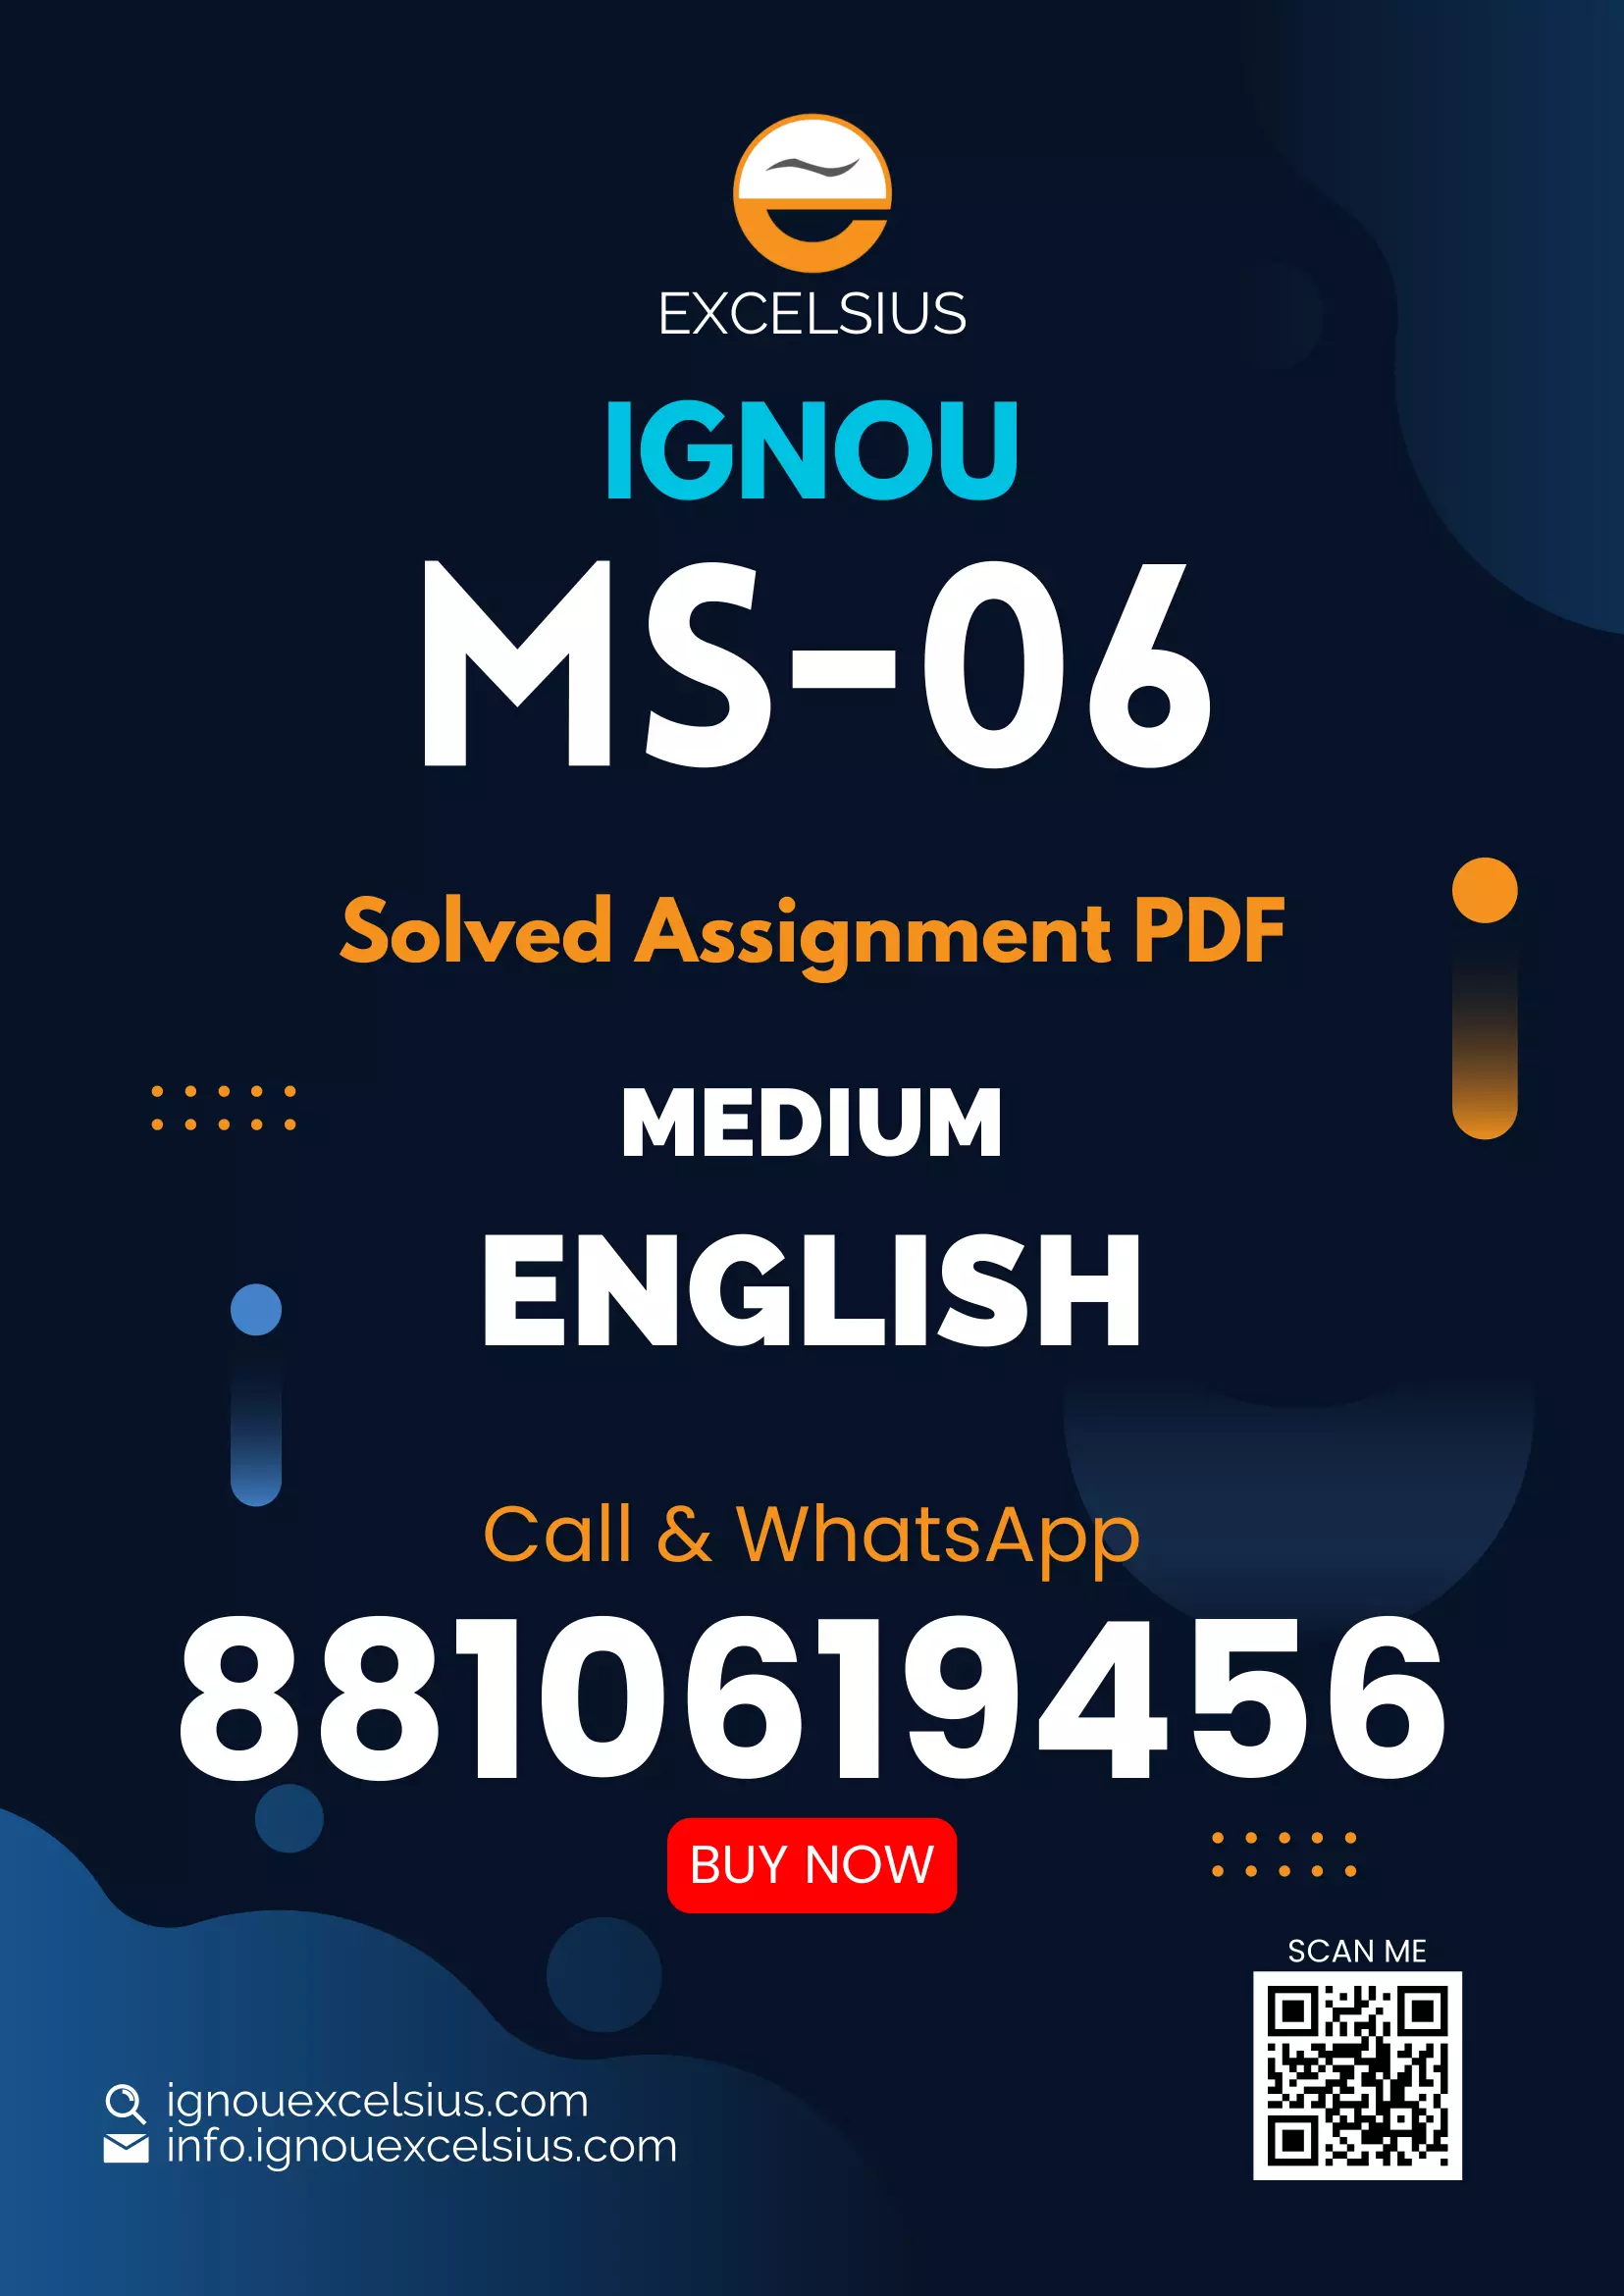 IGNOU MS-06 - Management of Machines and Material, Latest Solved Assignment-January 2023 - July 2023